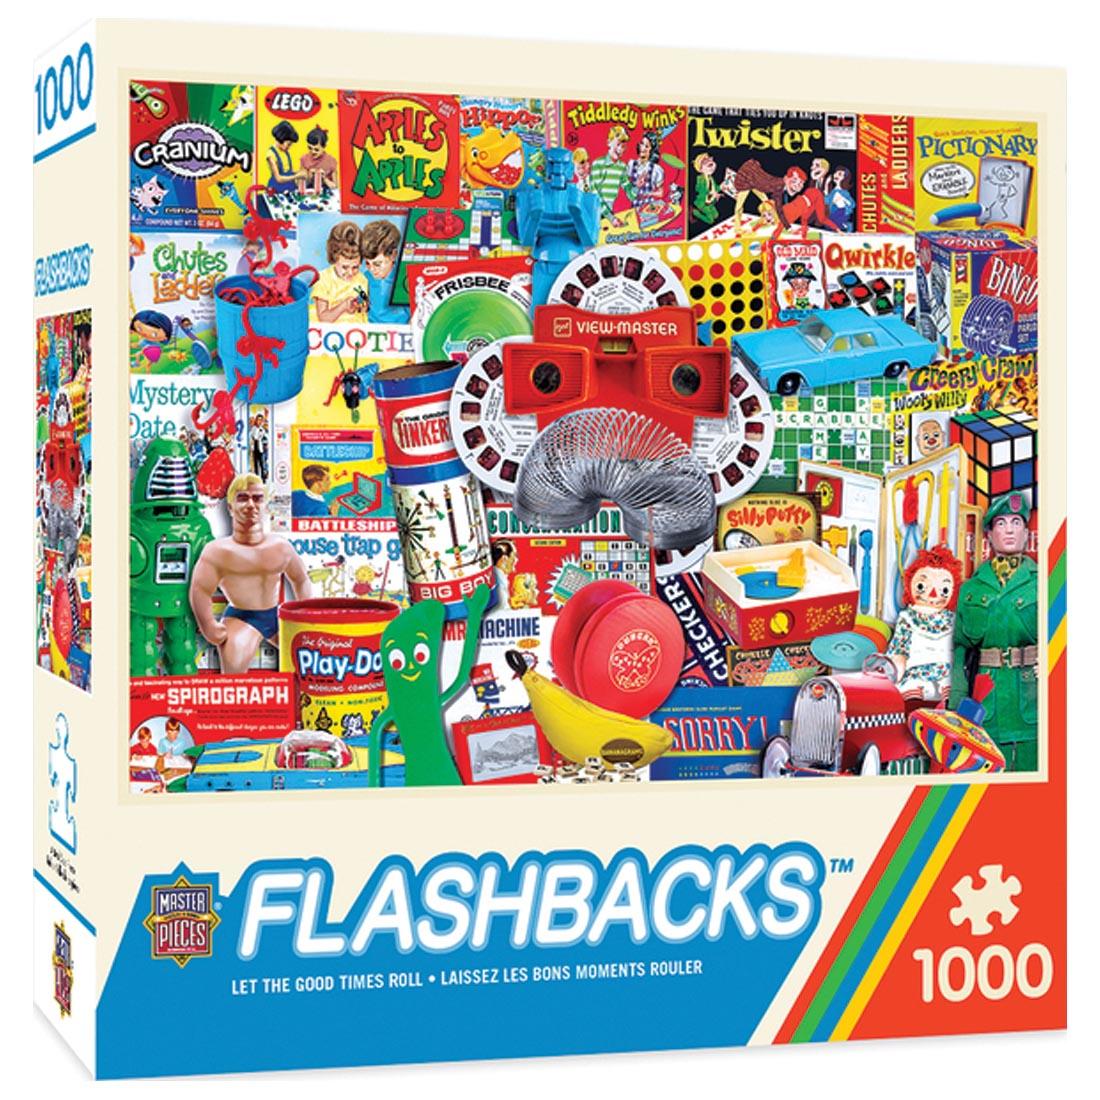 Flashbacks Series Let the Good Times Roll 1000-Piece Puzzle by MasterPieces